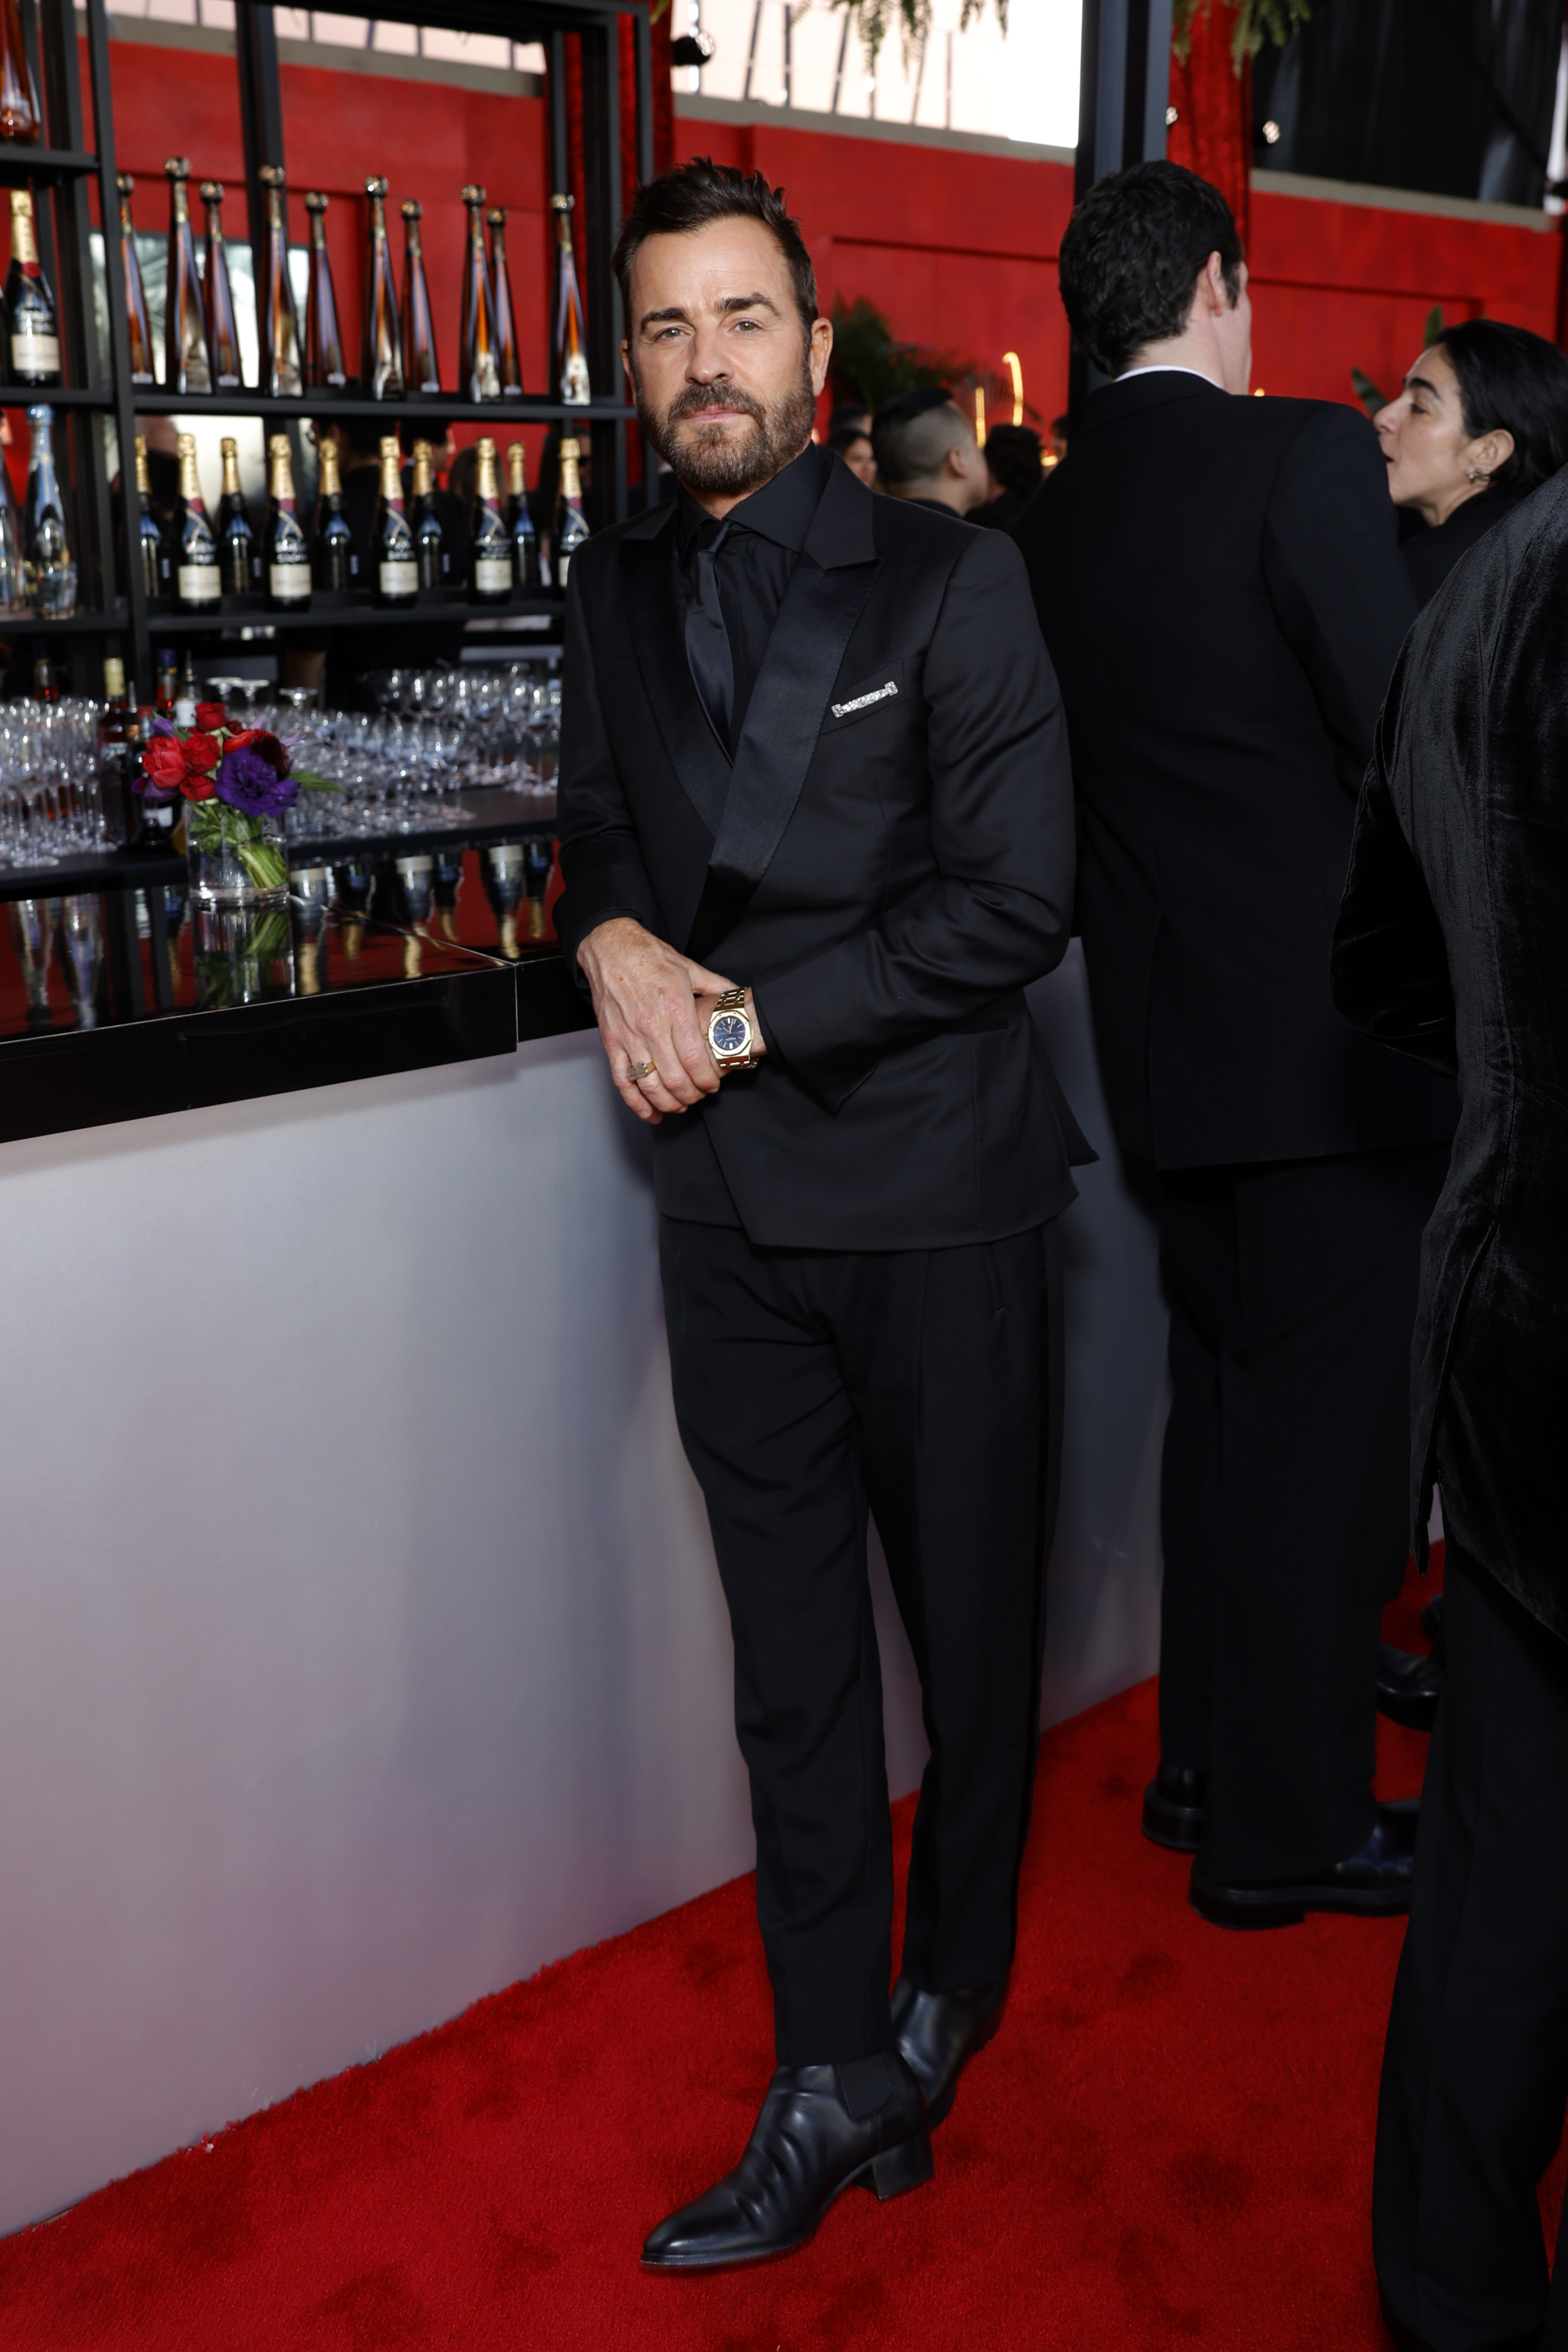 Justin Theroux in a black suit, standing on a red carpet, leaning against a bar with bottles in the background